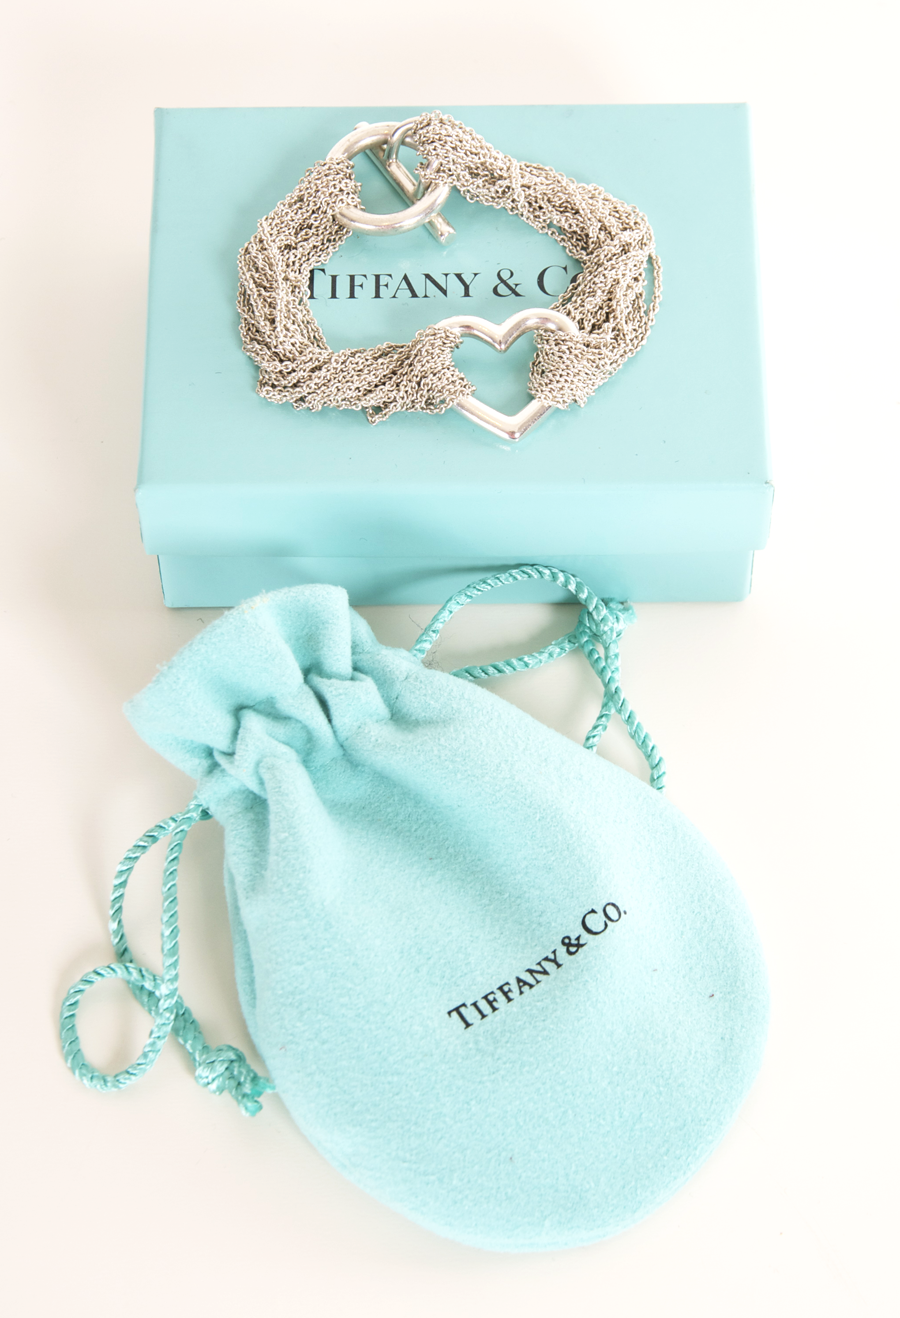 Tiffany Blue is so iconic! Make sure that you incorporate it into your party by indulging in the Tiffany Blue party range, perfect for weddings, birthdays, engagement parties, christmass and so